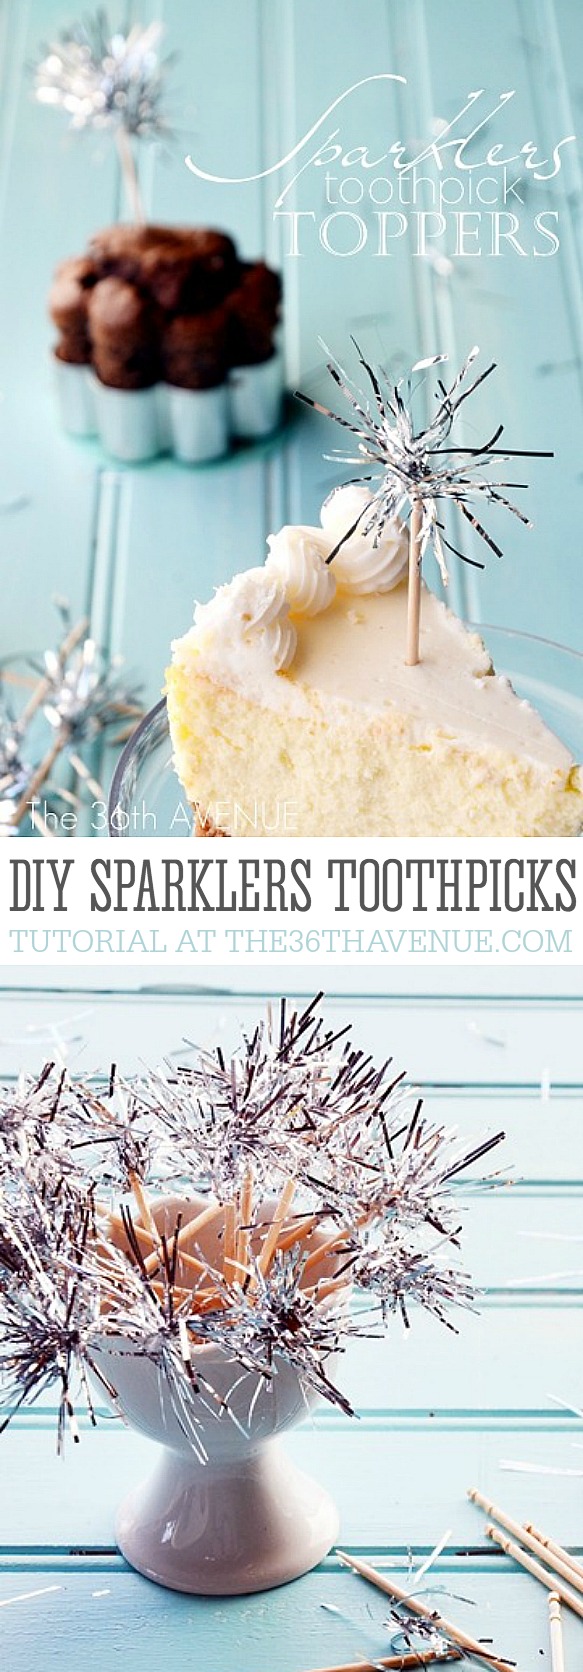 Party Toppers - DIY Sparklers Toothpick Tutorial... Perfect for appetizers and dessert toppers! 